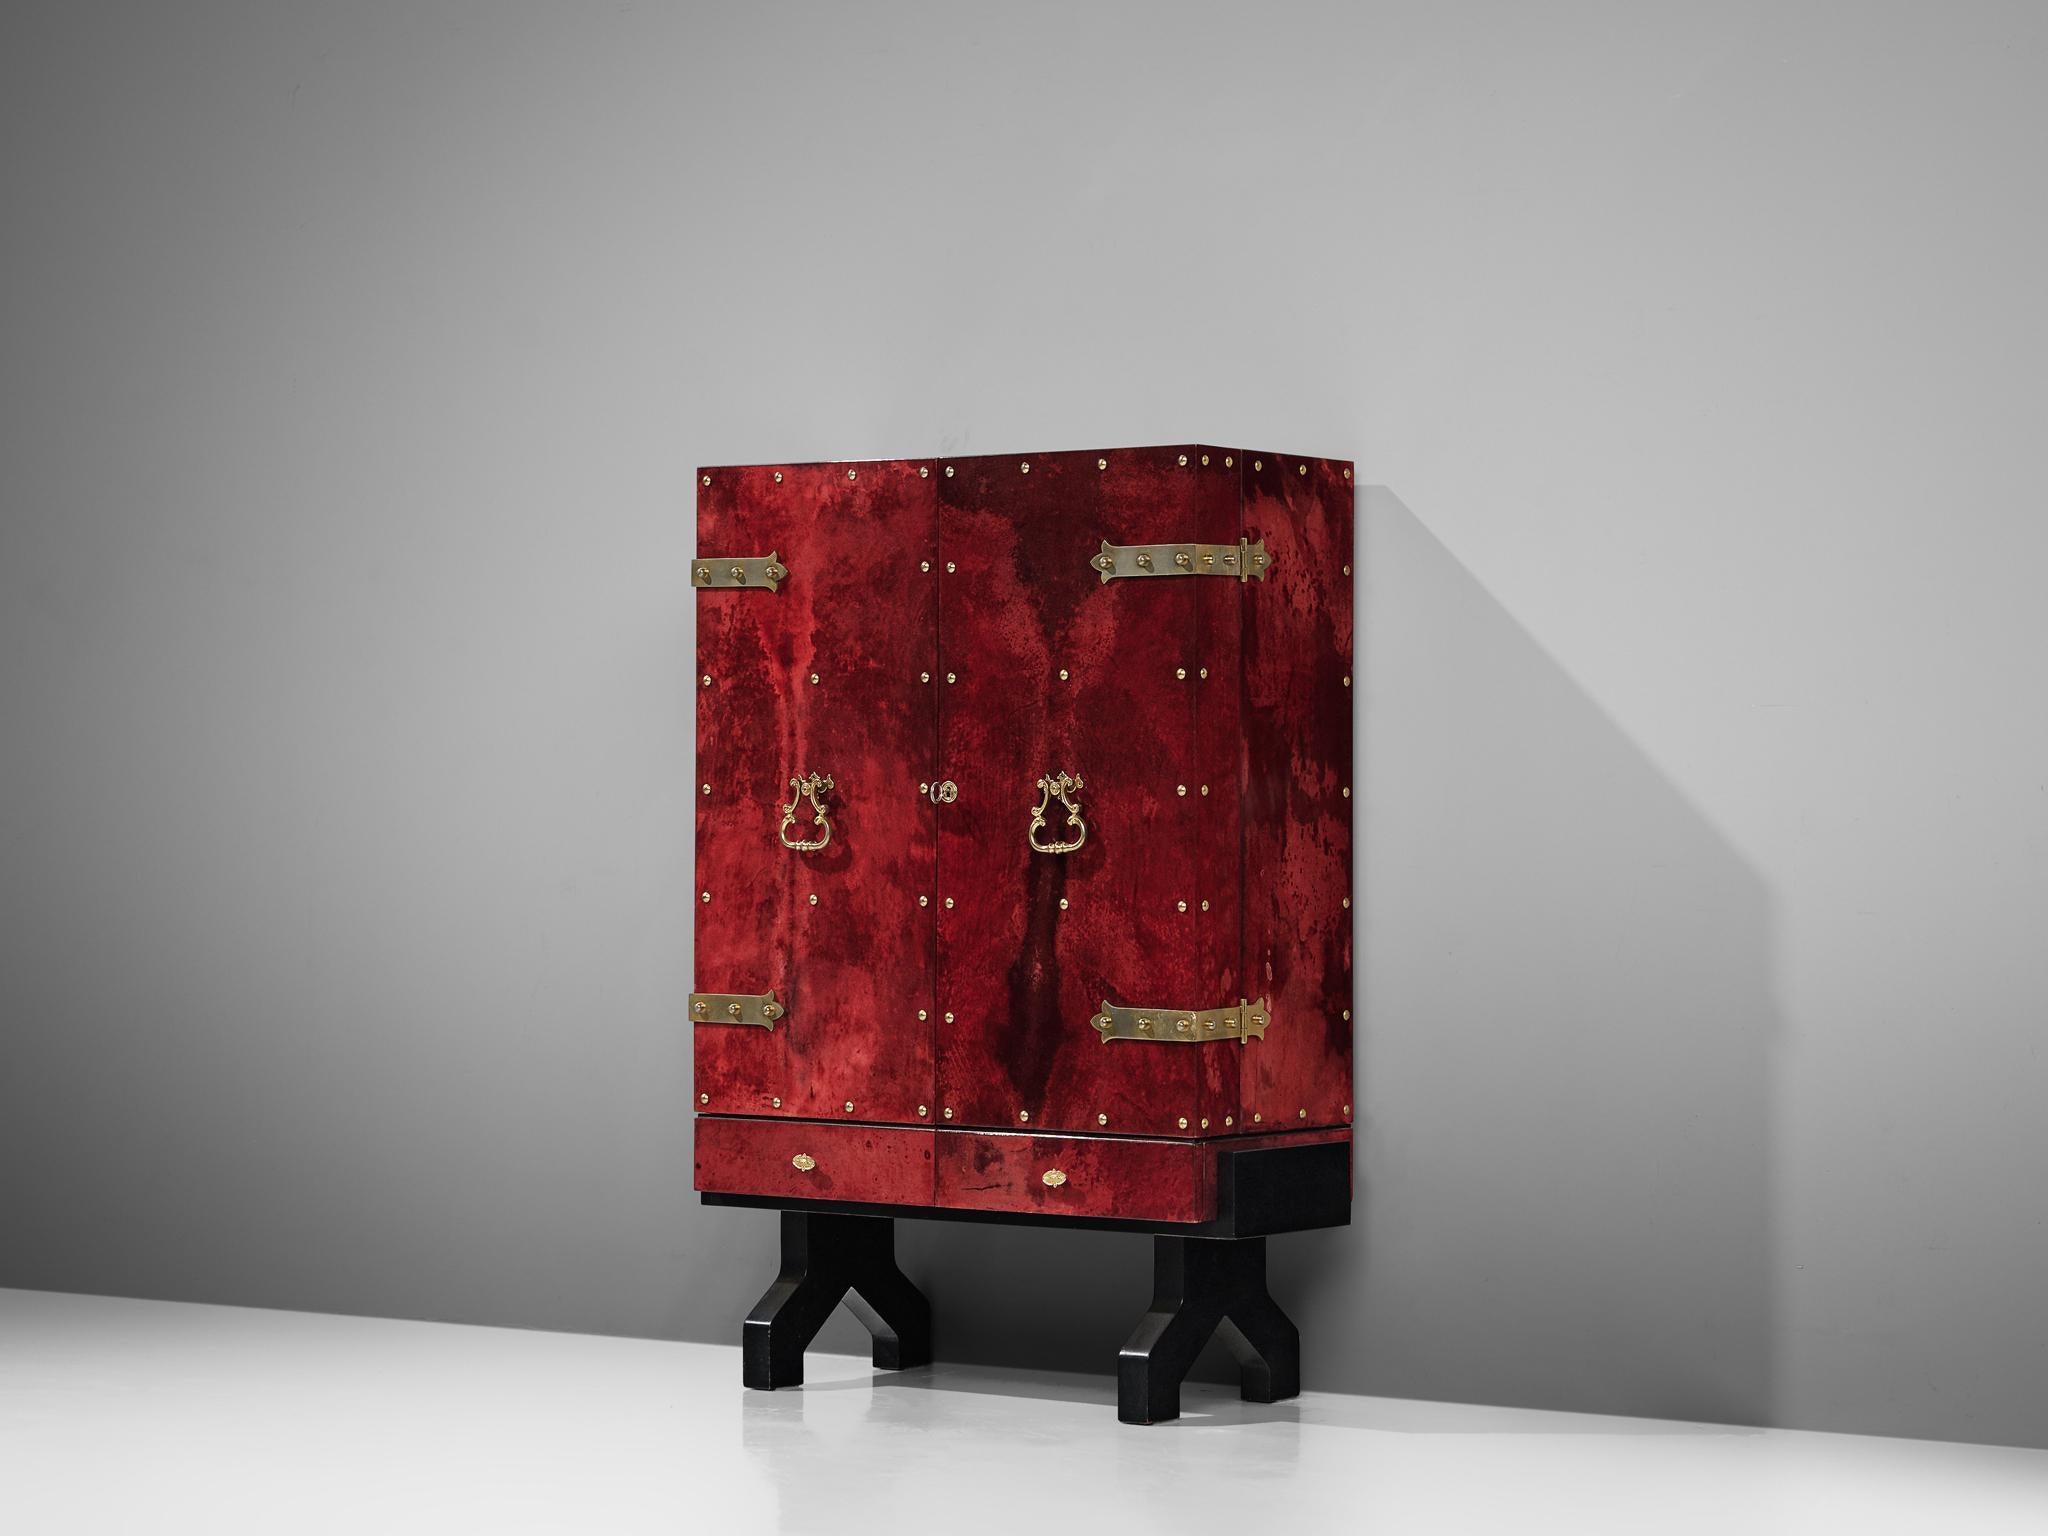 Aldo Tura, cabinet, wood, glass, metal and parchment, Italy, 1950s.

This is a cabinet designed by Aldo Tura that is meant to function as a dry bar or liquor cabinet. The wooden base holds a cabinet that's covered in a nice deep red parchment. The